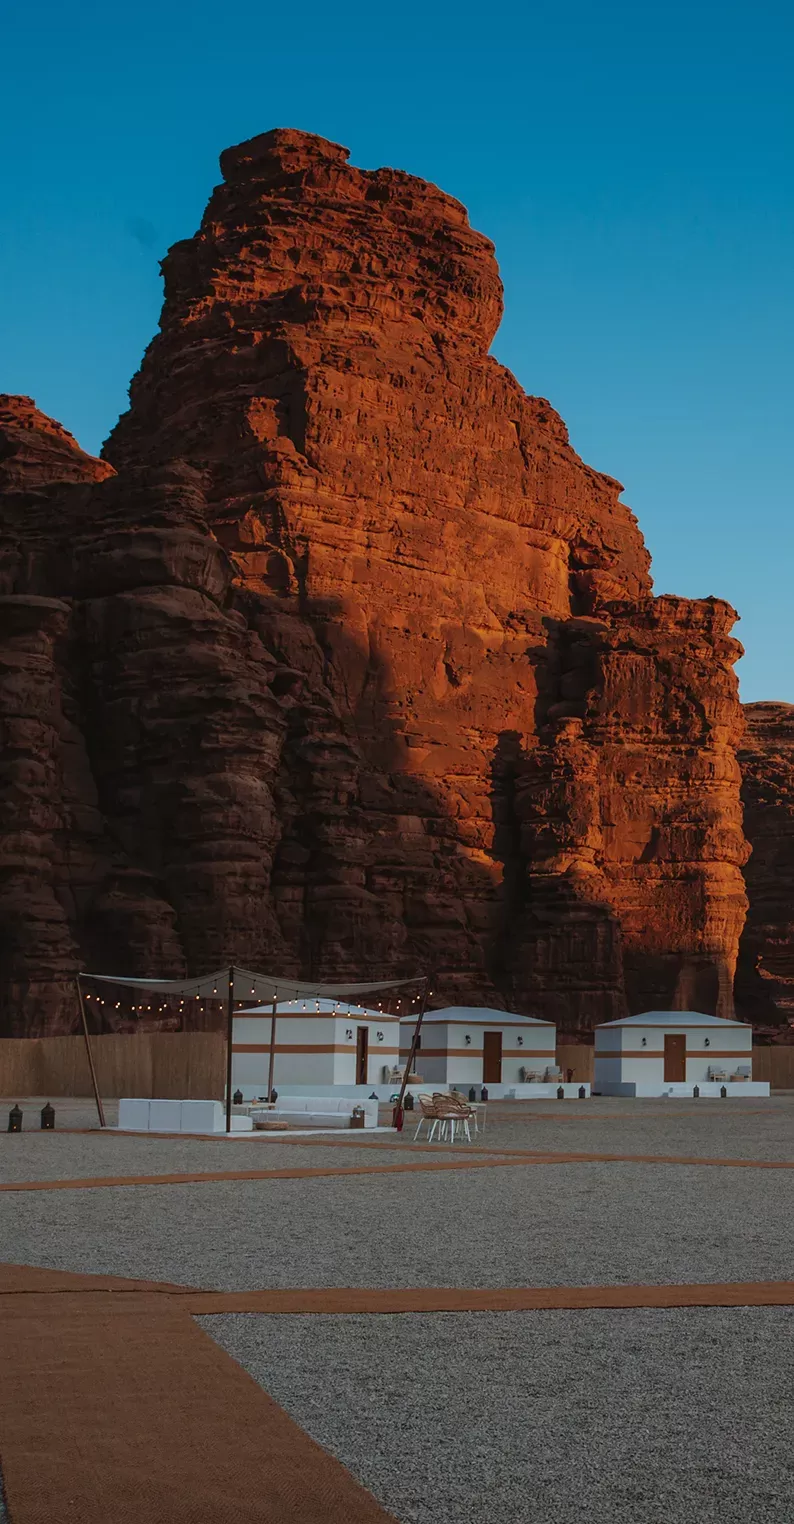 Outside luxury camping lodges amongst the desert and red rocks of NEOM, Saudi Arabia